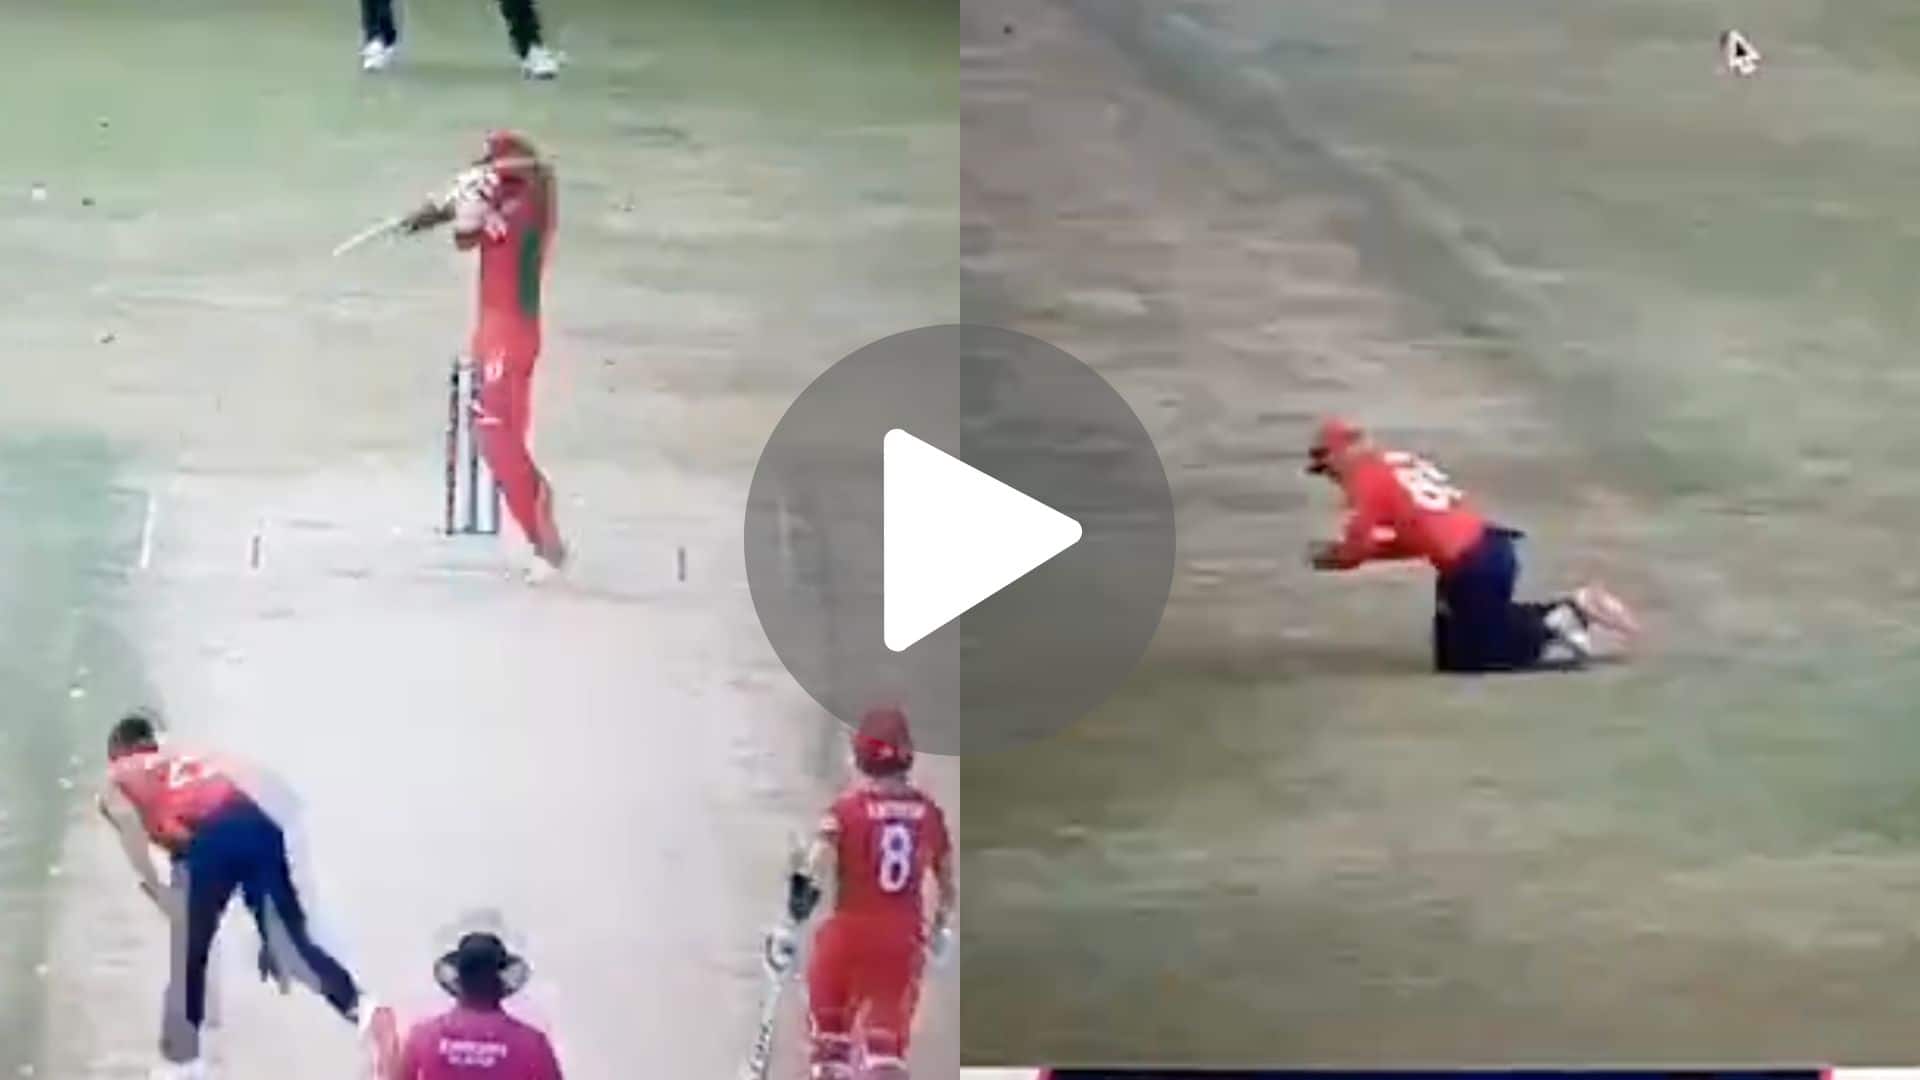 [Watch] RCB Star Will Jacks Takes A Blinder As Archer's Nasty Bumper Stuns Oman Captain